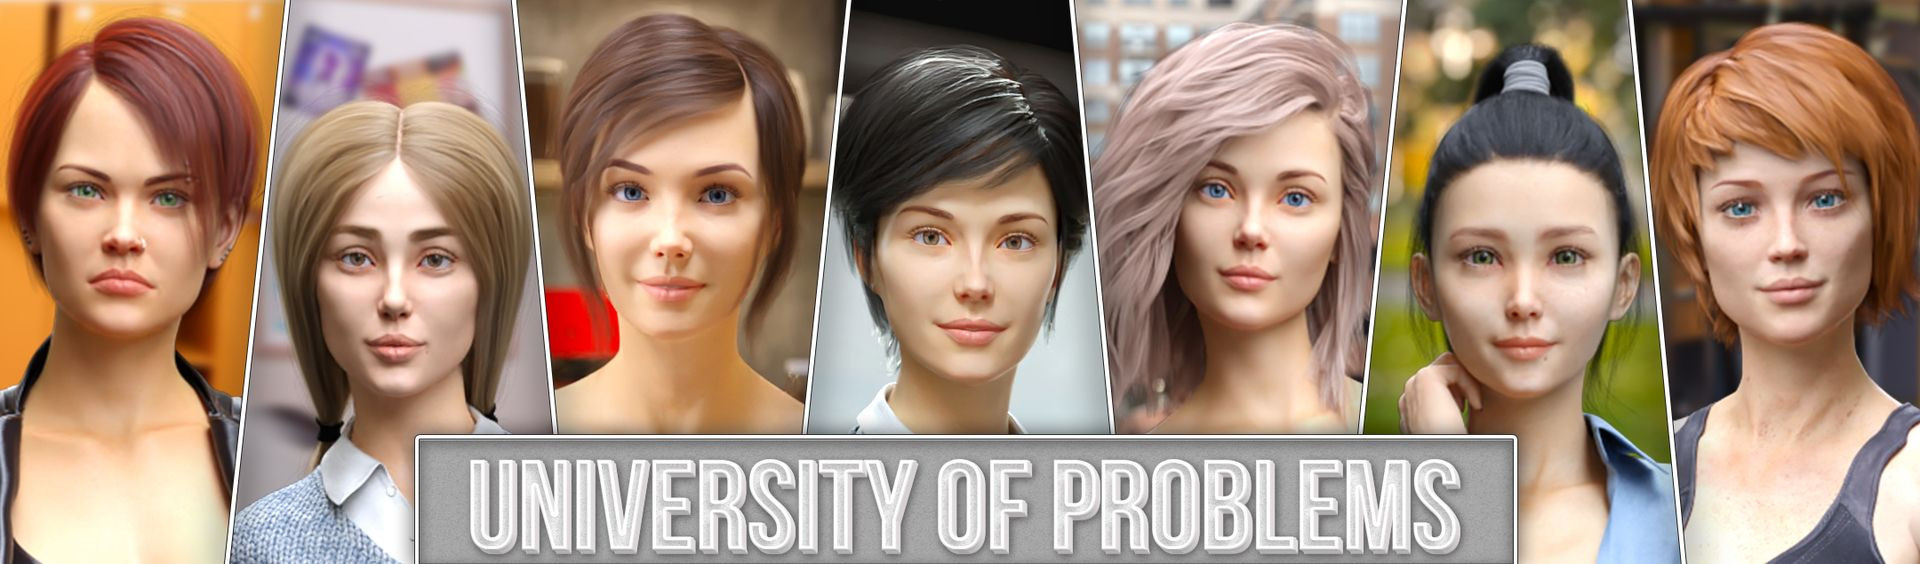 University of Problems [v1.3.0 Extended] (DreamNow) [uncen] [ADV, 3DCG, Male Protagonist, Anal, BDSM, Bondage, BlowJob, Corruption, Creampie, DP, Exhibitionism, Female Domination, FootJob, Foot Fetish, Groping, Treesome, Lesbian, Male Domination, Masturbation, MILF, Oral sex, Sex Toy, Stripping, Teasing, Vaginal Sex] [Windows] [eng]